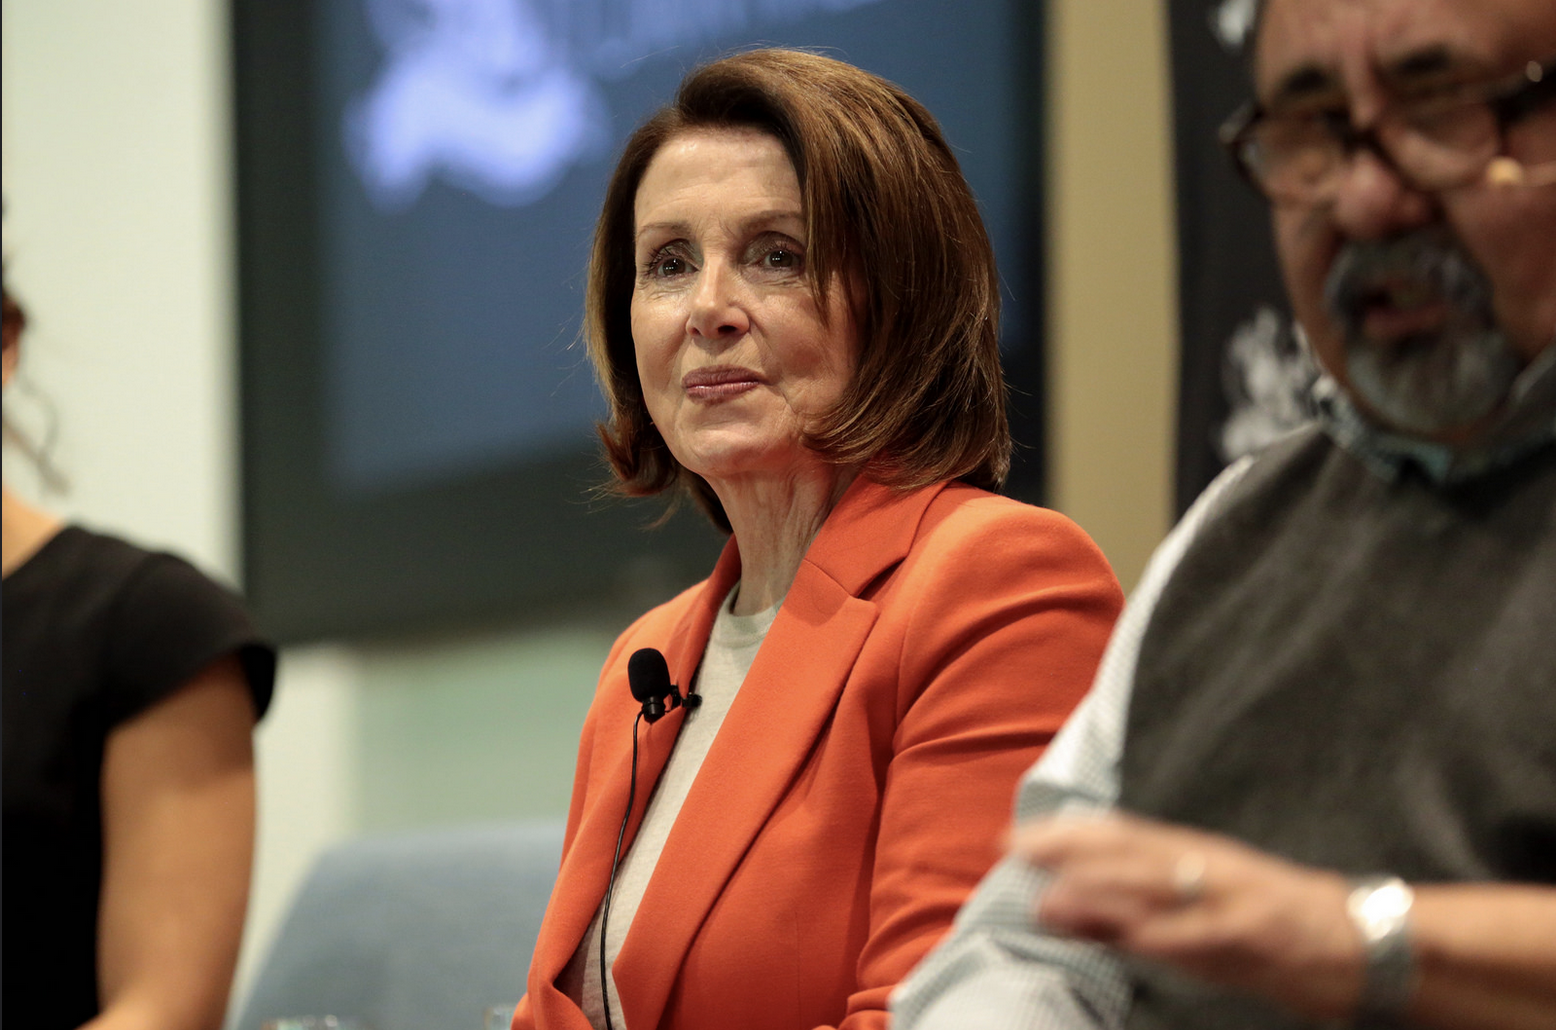 Nancy Pelosi Told One Truth About Impeachment That Left Everyone Surprised1556 x 1030